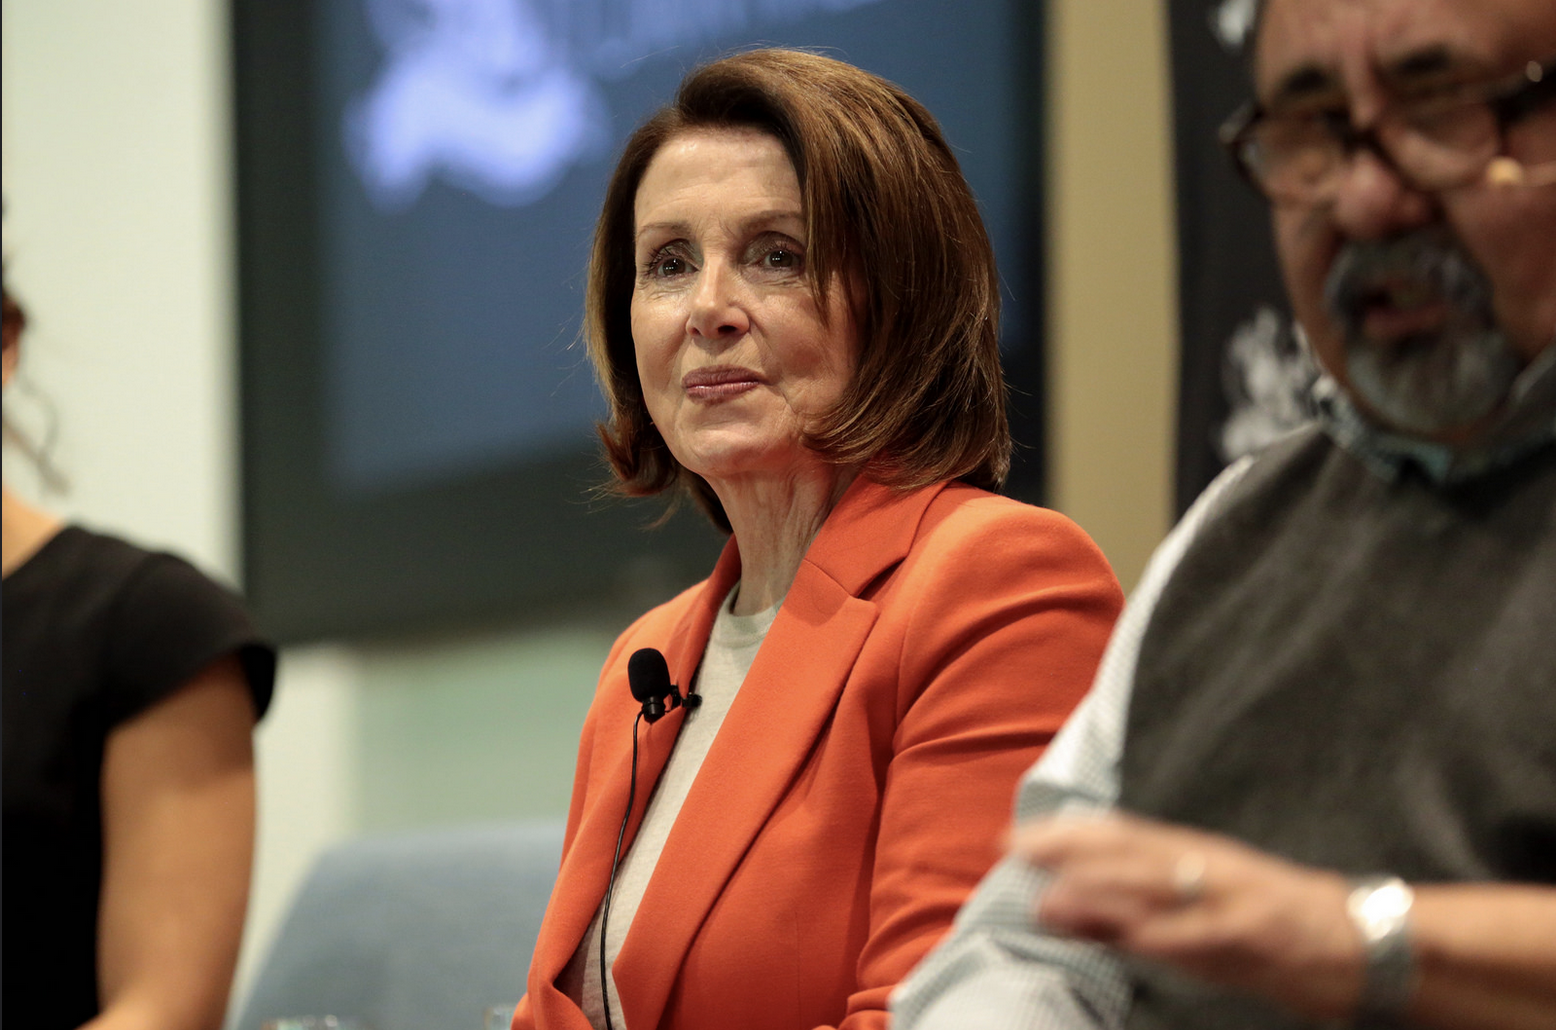 Nancy Pelosi Told One Truth About Impeachment That Left Everyone Surprised1556 x 1030